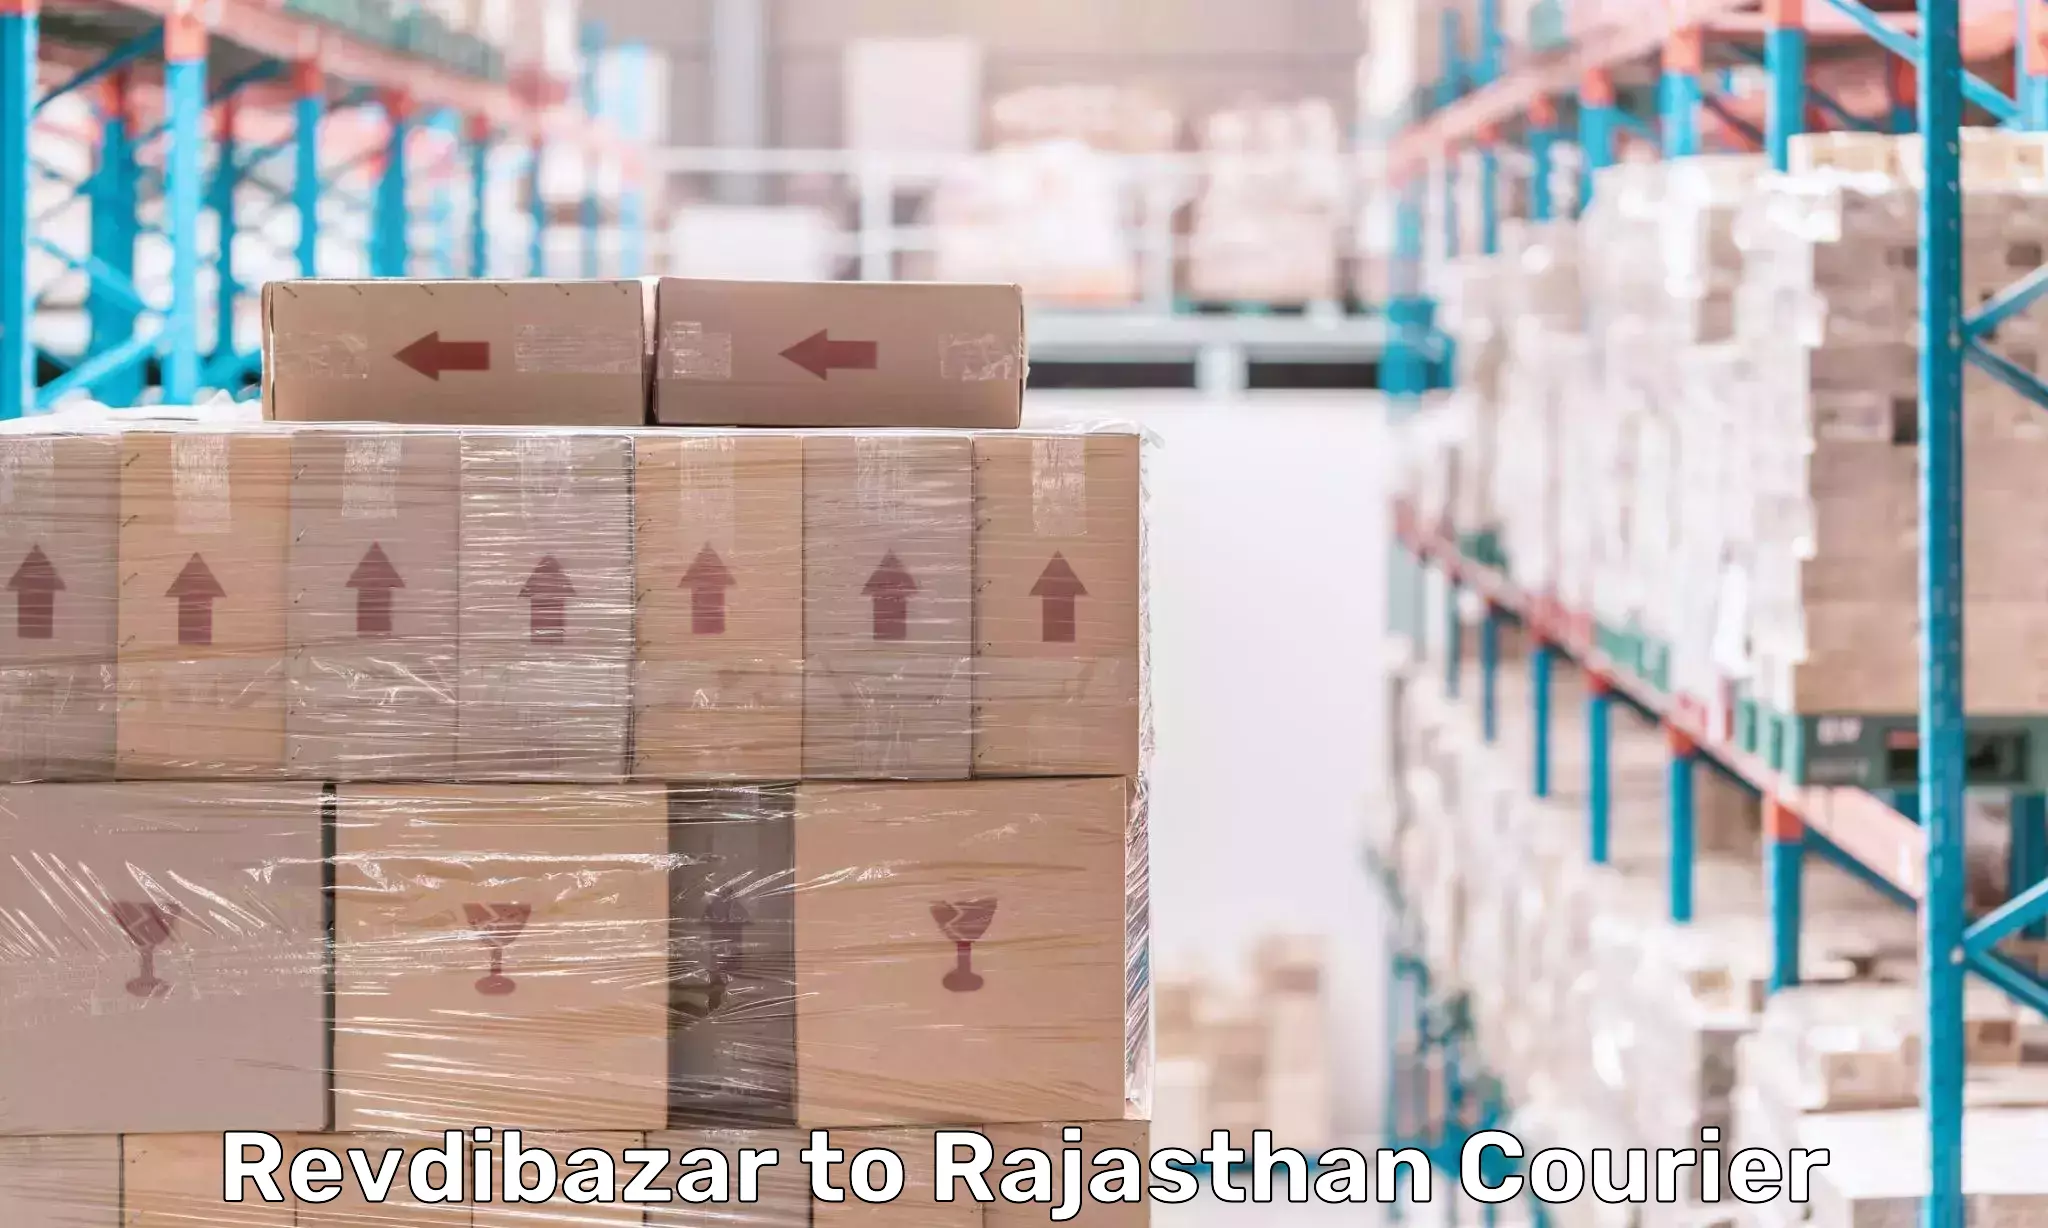 Package delivery network Revdibazar to Rajasthan